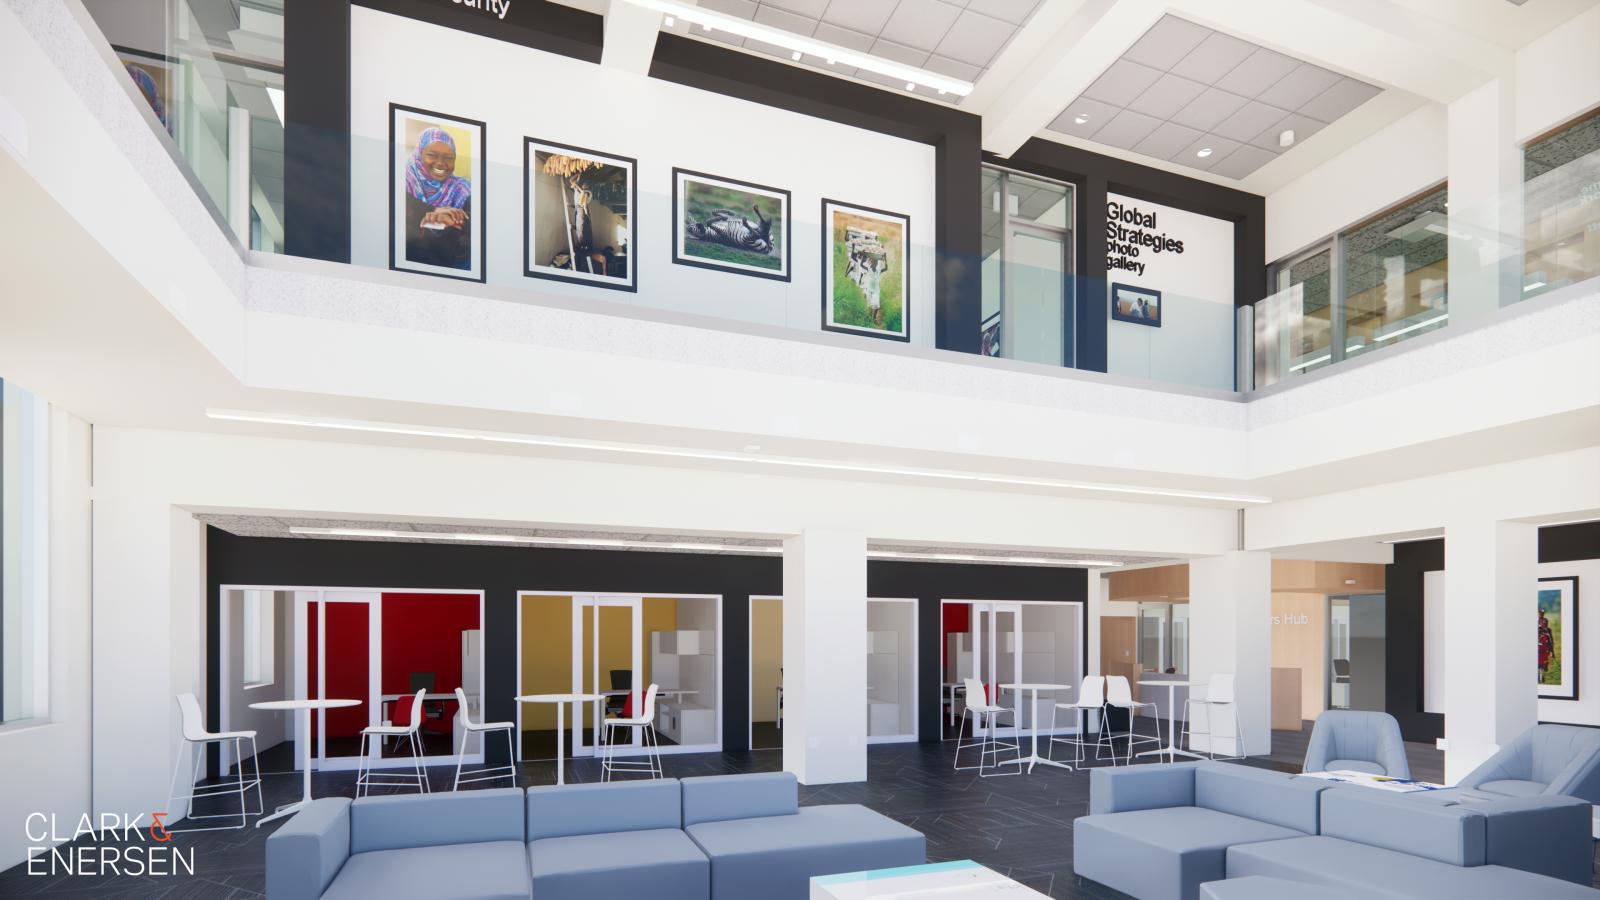 An architect’s rendering of the global education space shows the photo gallery and interactive meeting spaces that will be added during the Pound Hall renovations.